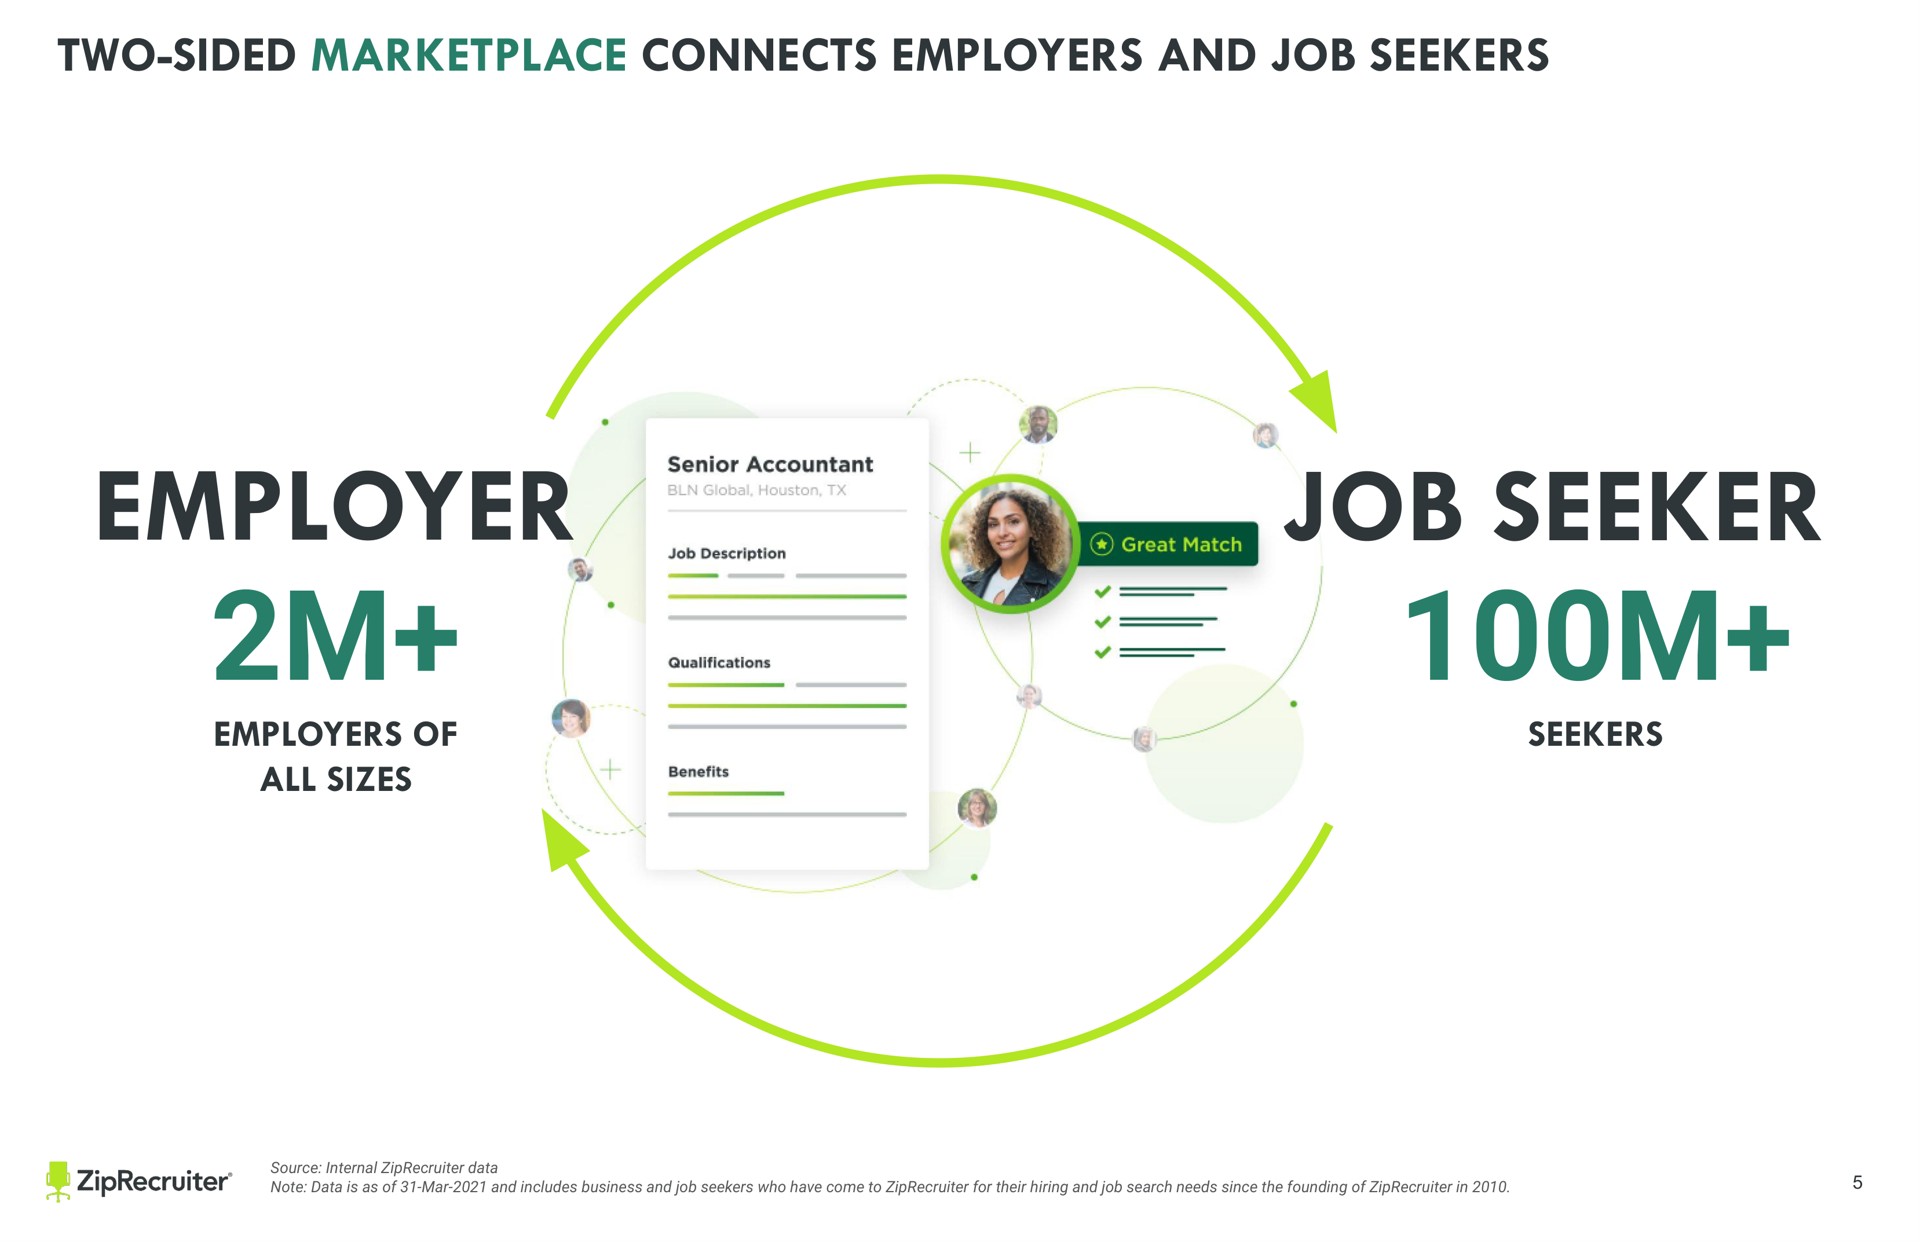 text a a a employer employers of all sizes job seeker seekers keep all text and images other than full slide backgrounds from the sides of the slide to avoid being cut off when printed two sided connects a | ZipRecruiter